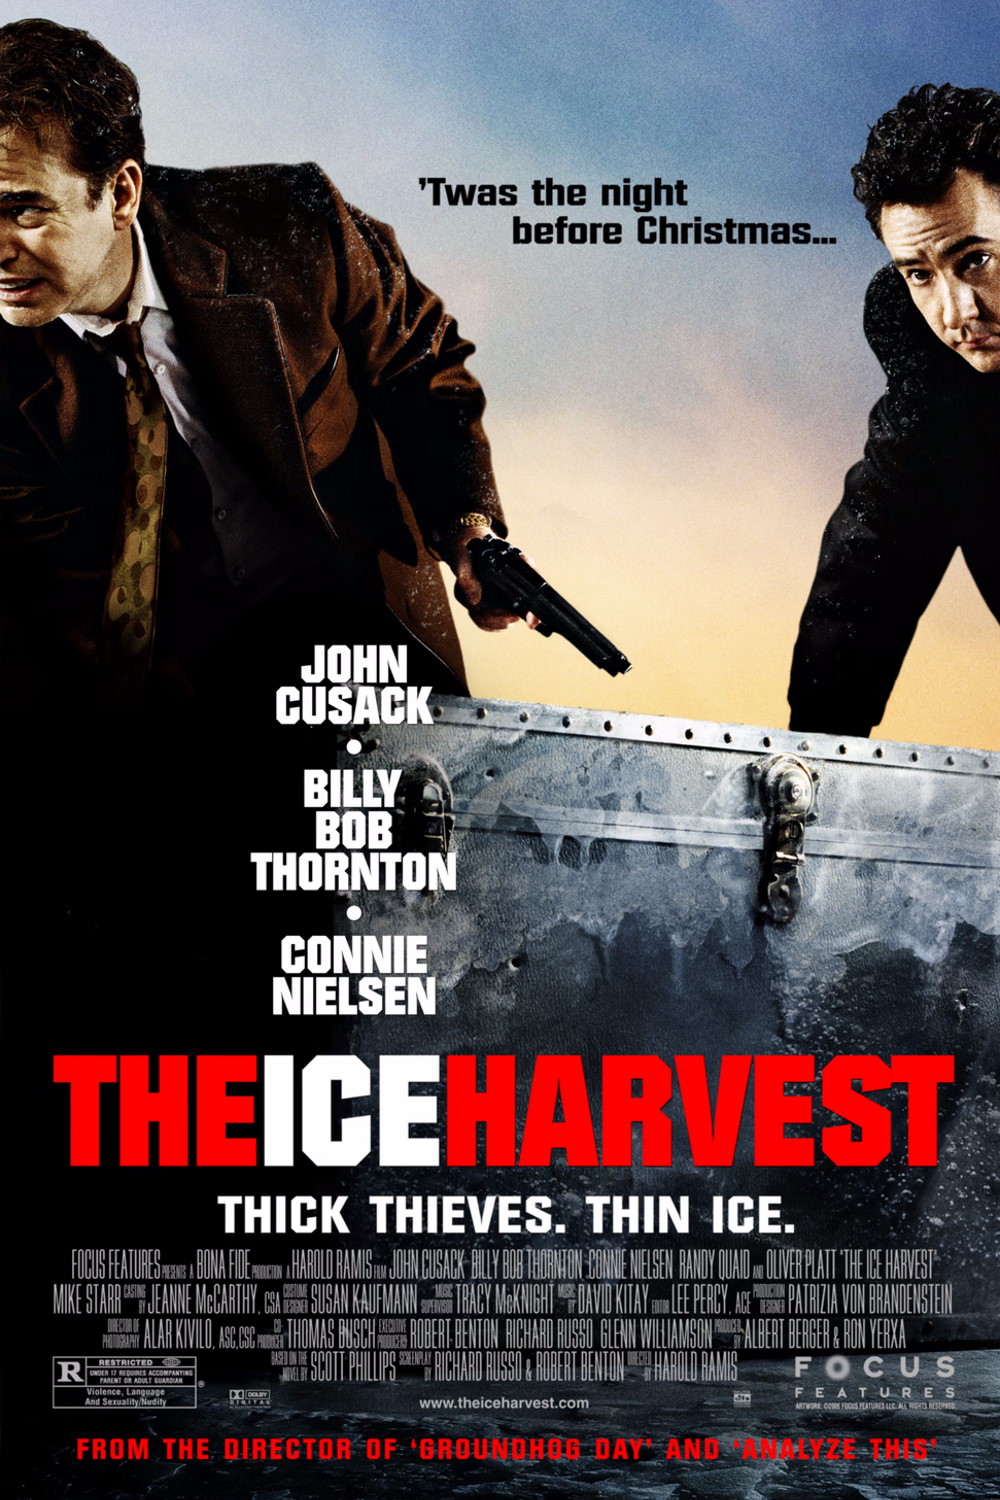 The Ice Harvest (2005) Poster